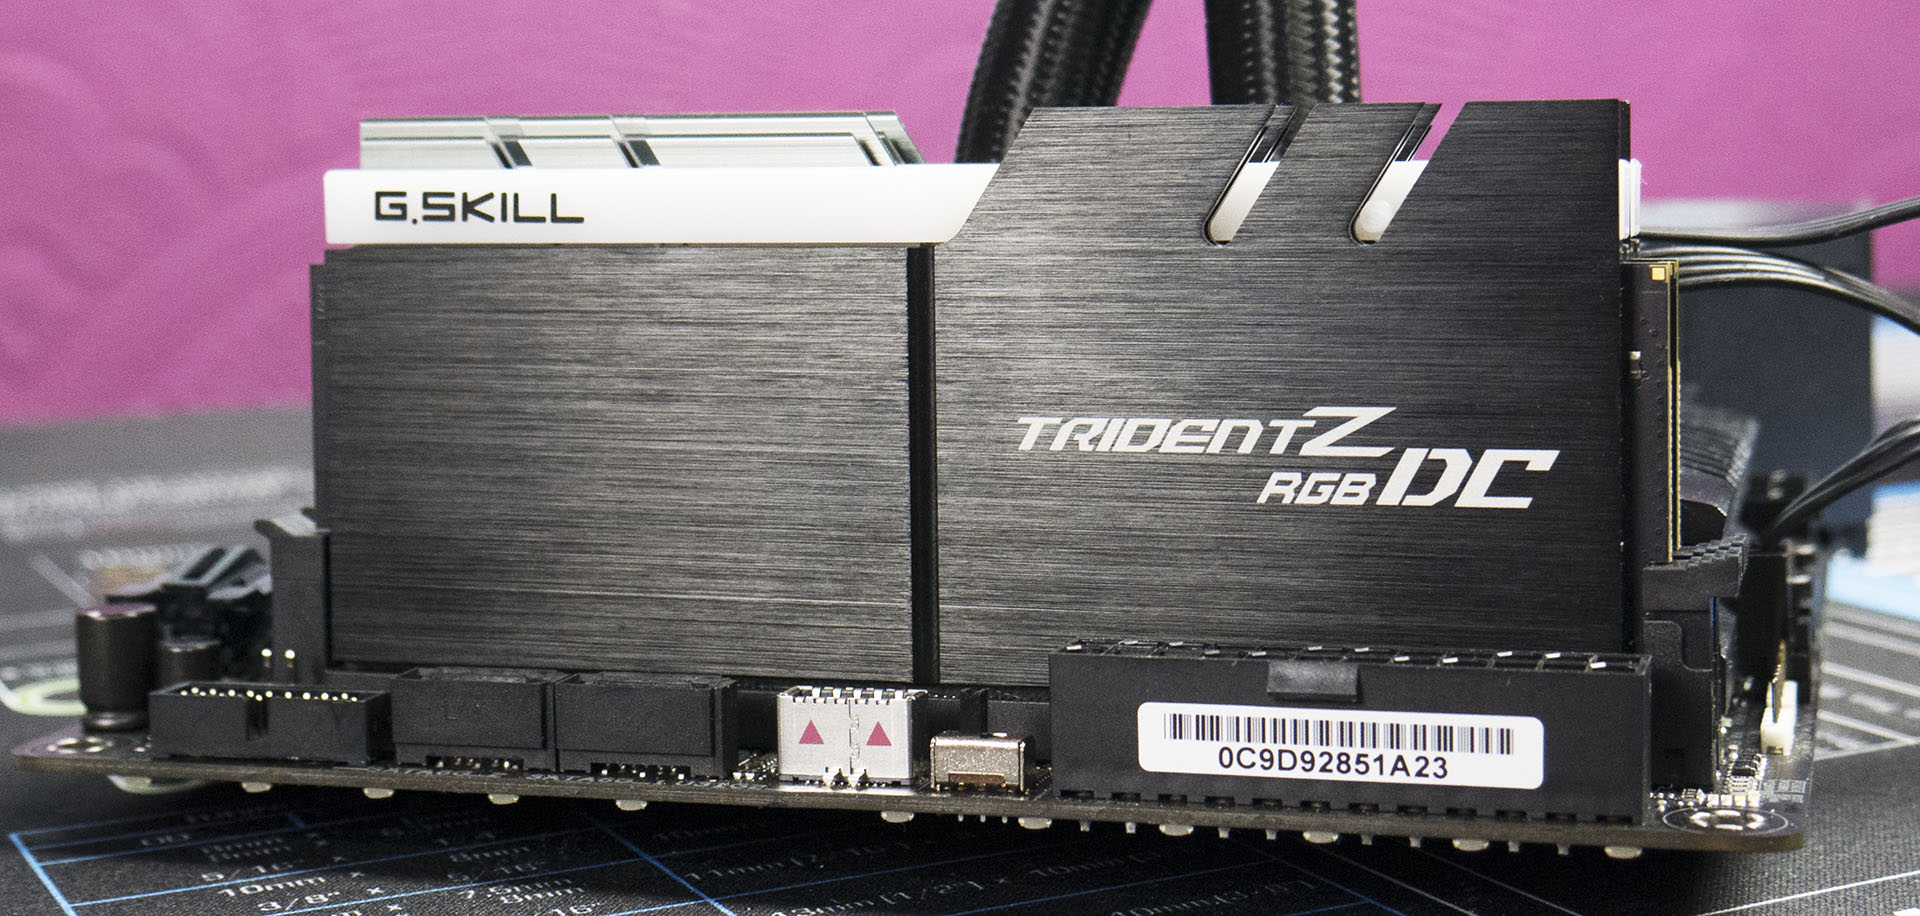 G.Skill TridentZ RGB DC Overview - Double Height DDR4: 32GB 